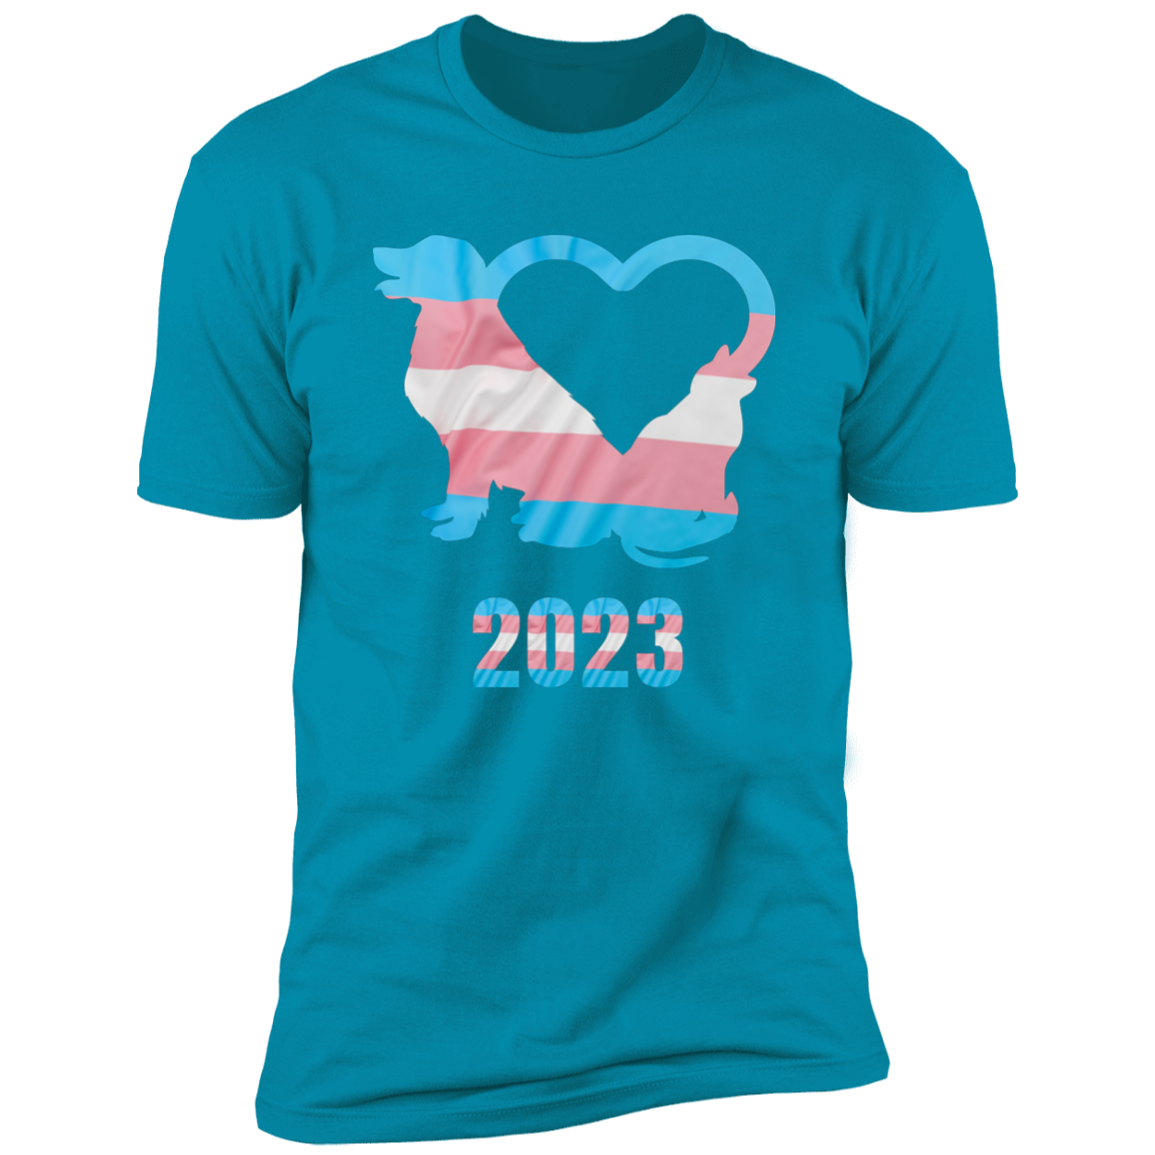 Trans Pride Dog & Cat Heart Pride T-shirt, Trans Pride Dog & Cat Shirt for humans, in turquoise